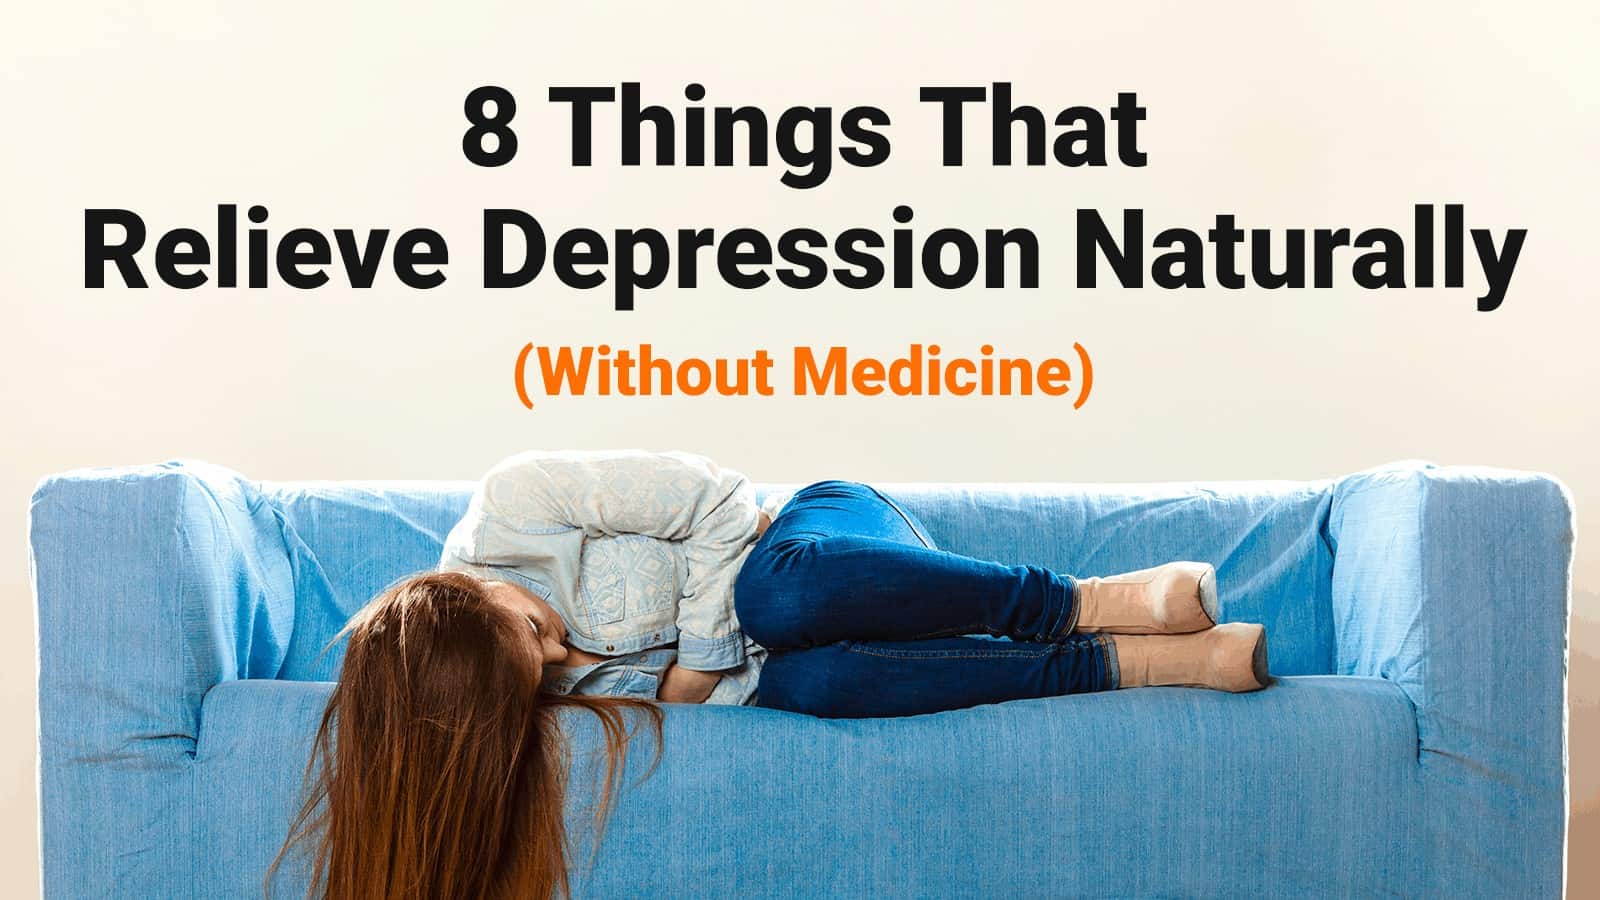 8 Things That Relieve Depression Naturally (Without Medicine)